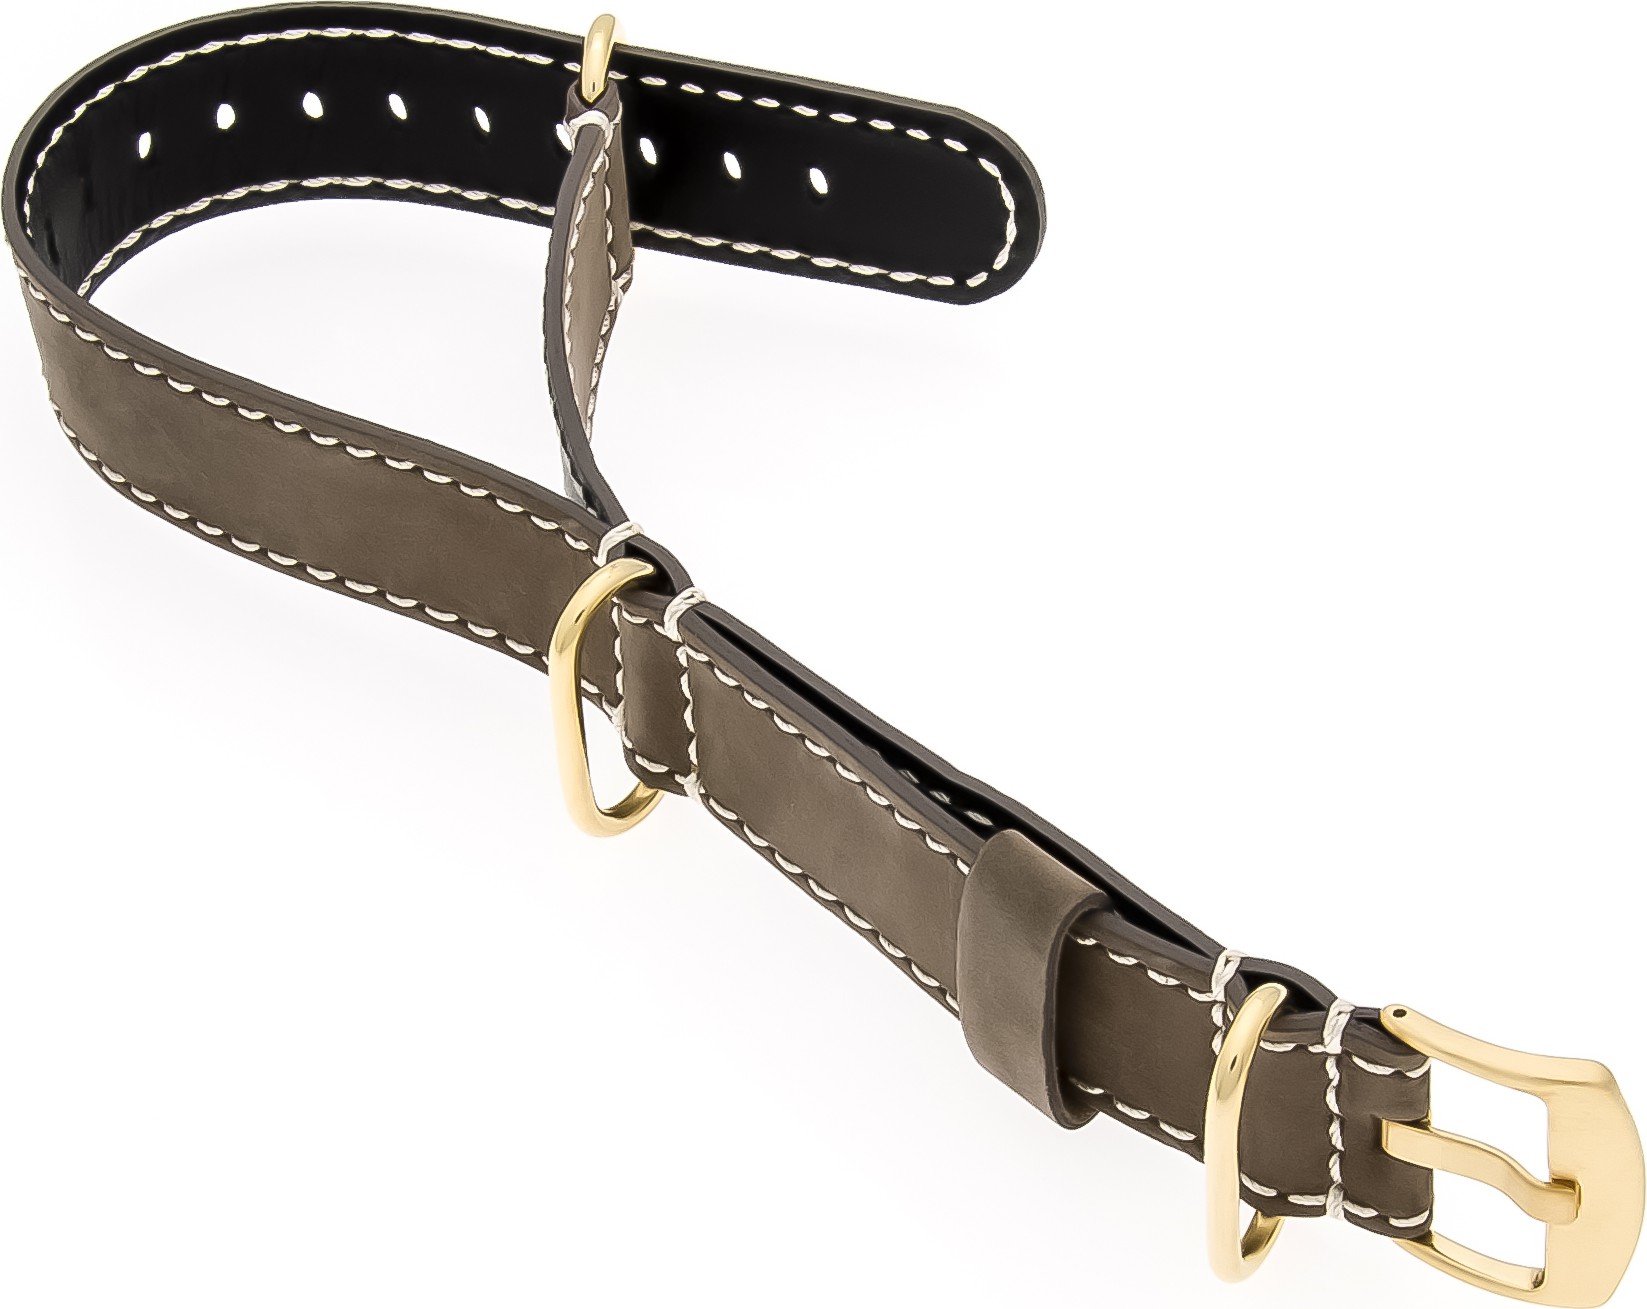  GOLD-NATO Watch Strap - Strap - Military - Real Leather - Gold Buckle  Brown/White 